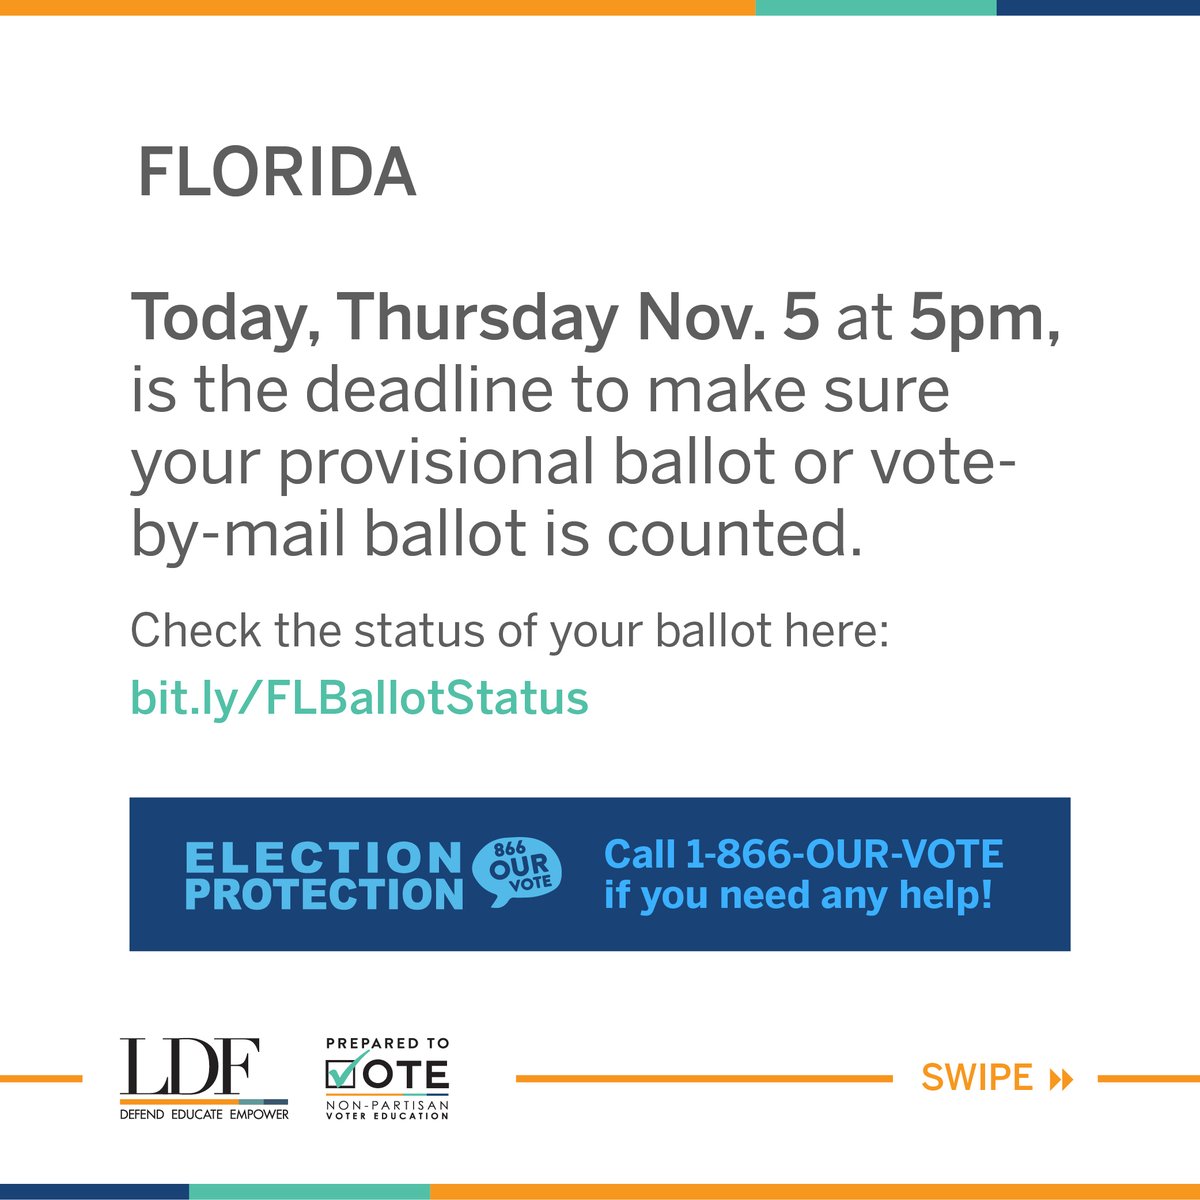 FLORIDA! You have until 5pm TODAY, Nov. 5 to make sure your provisional or mail-in ballot is counted! Check the status of your ballot and how to fix any issues here:  https://bit.ly/2TYXXi2 Don’t wait! Call 866-OUR-VOTE if you need any help.